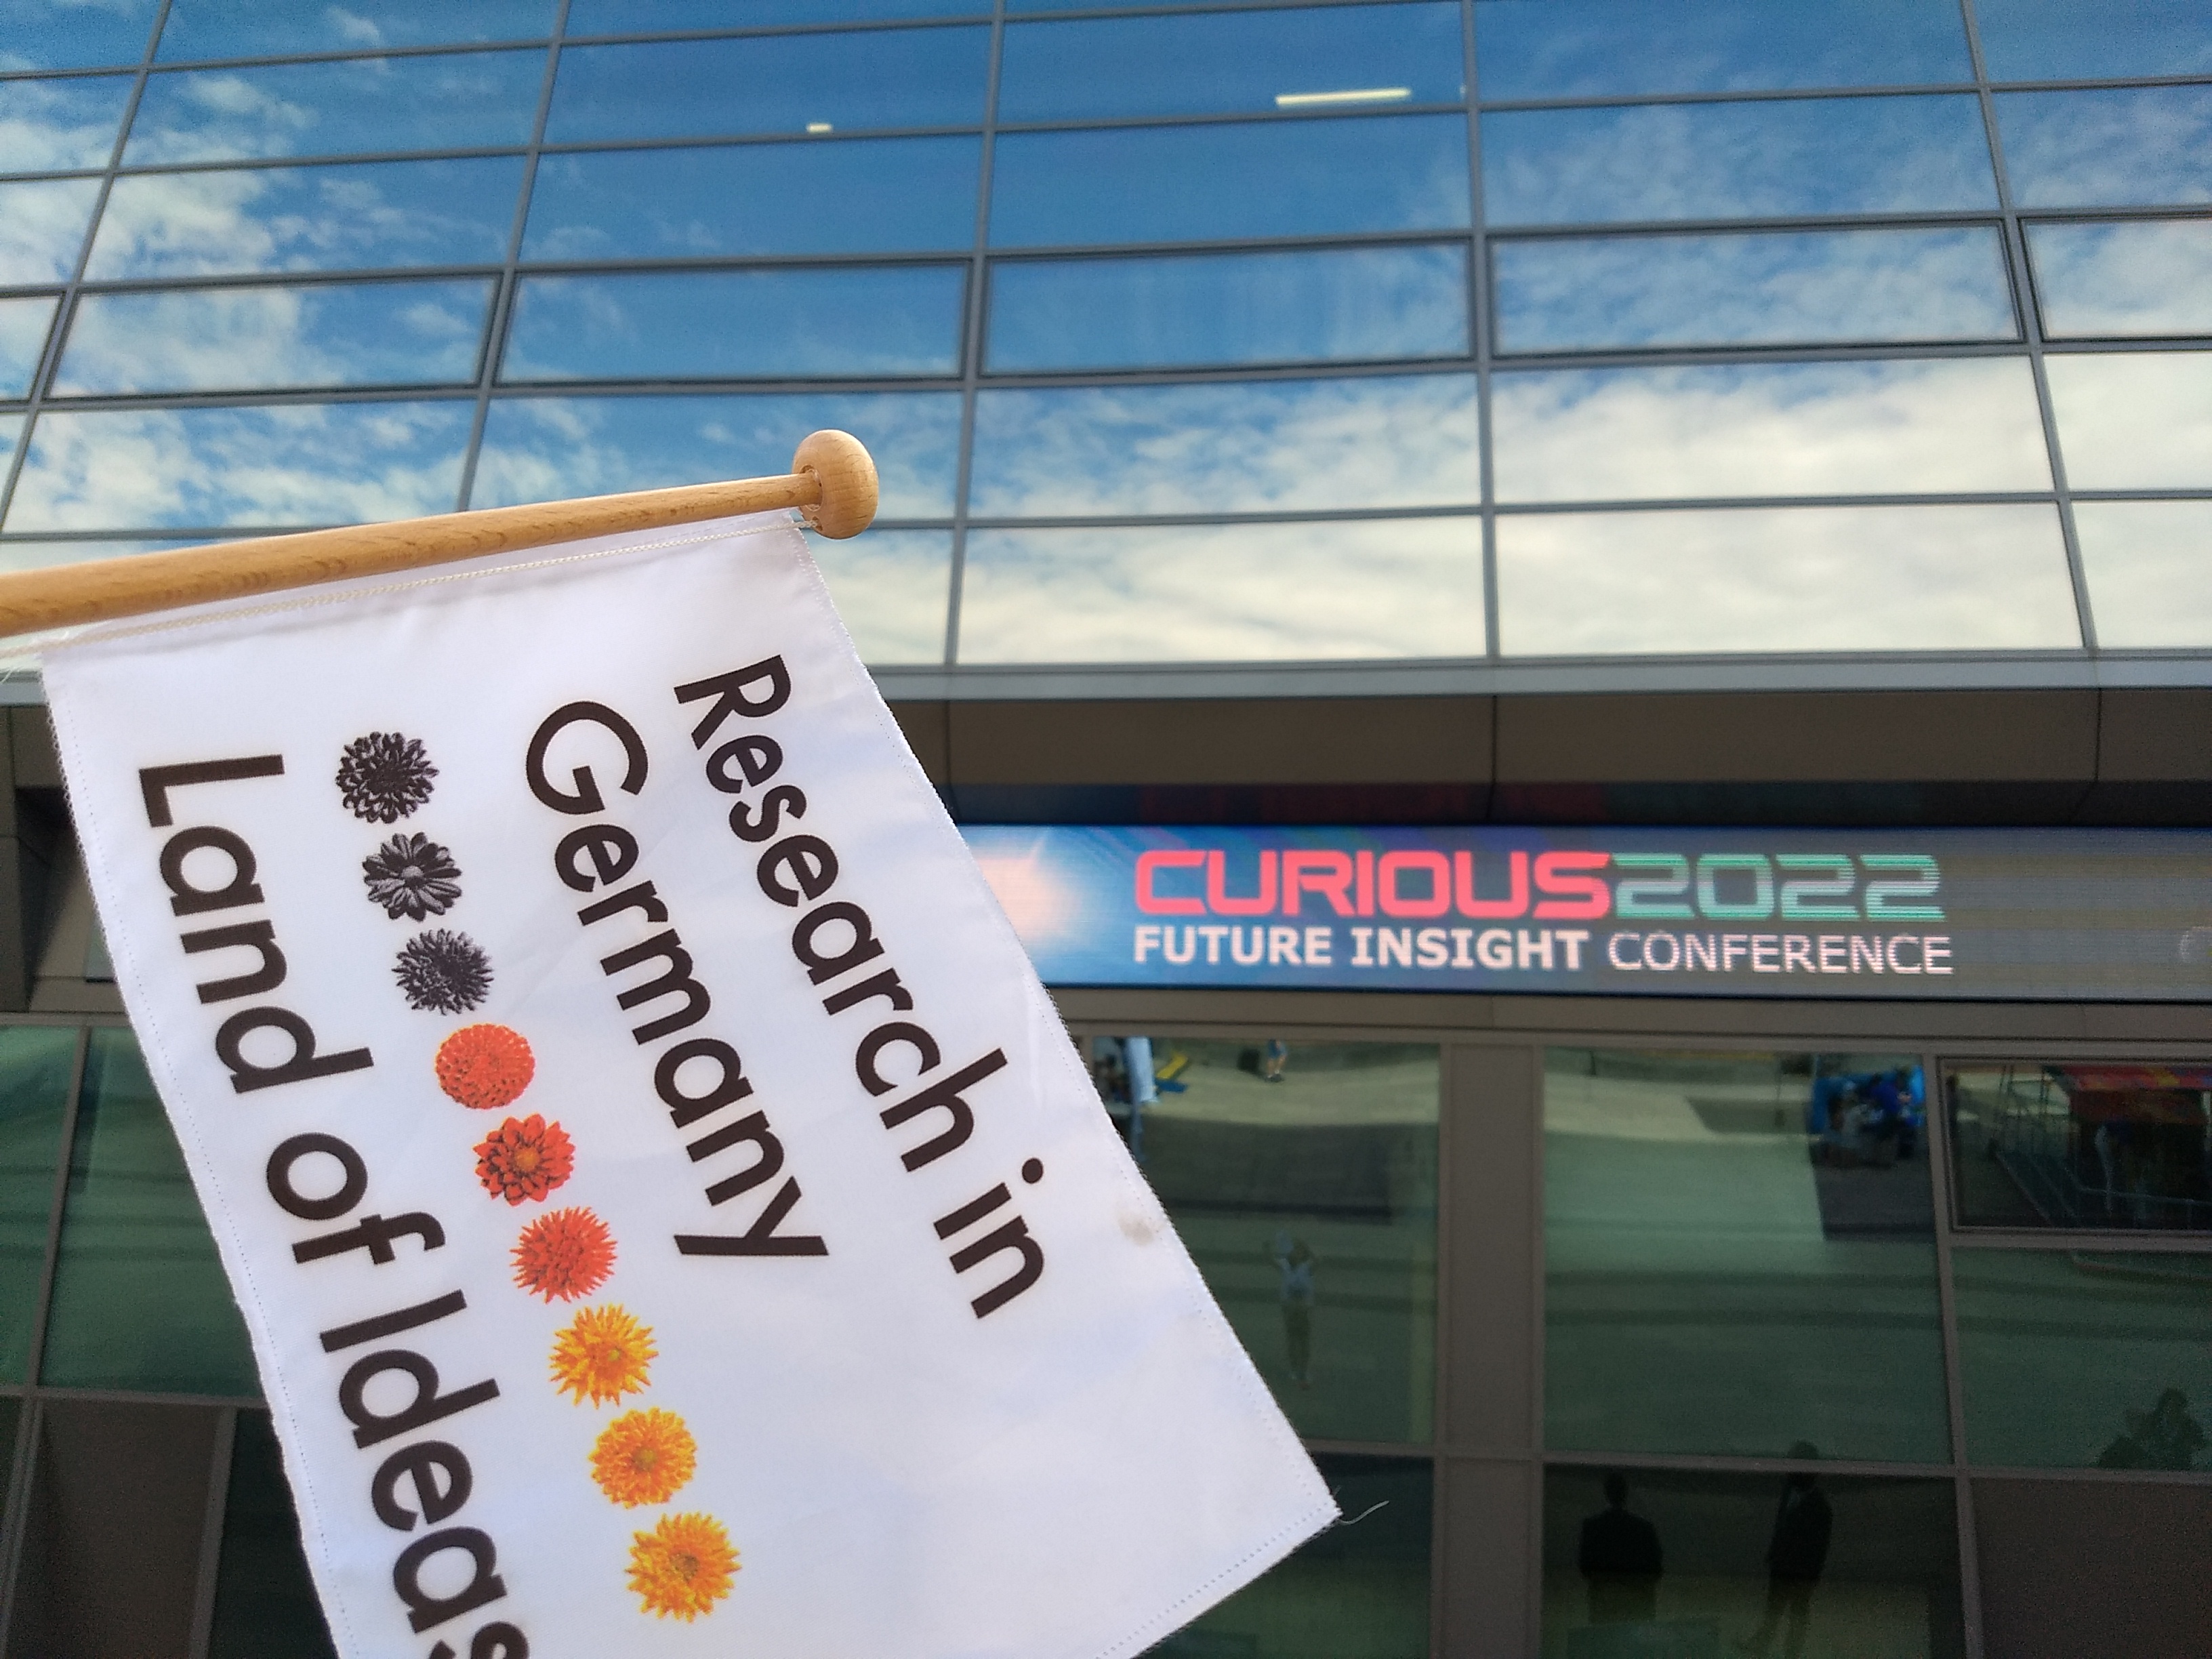 Entrance to the conference "Curious 2022 – Future Insight Conference"